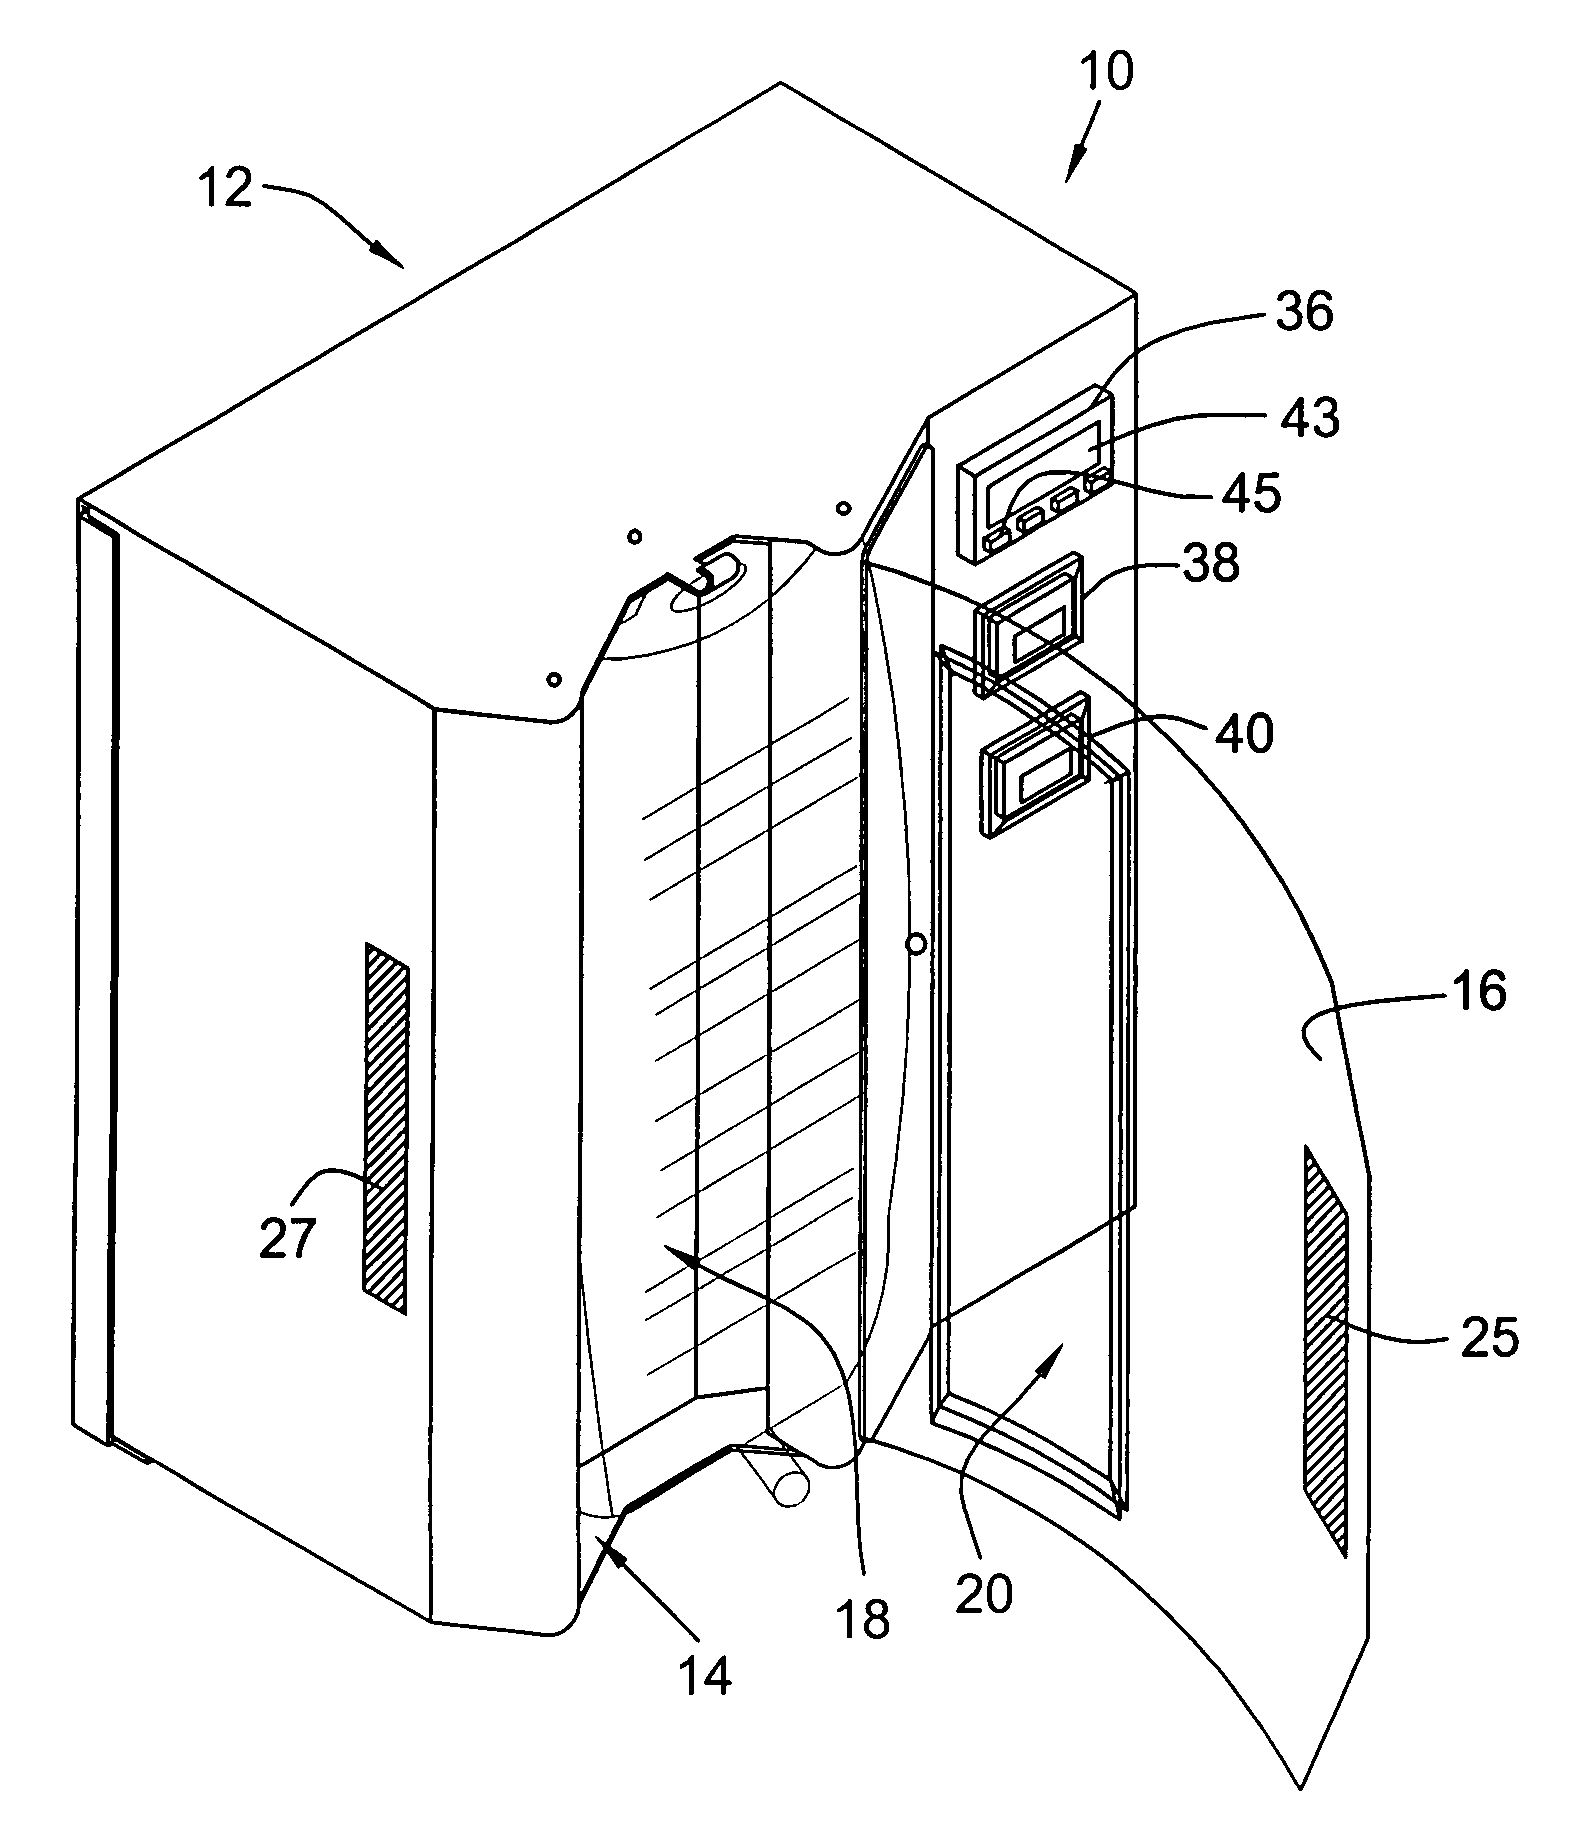 Method and apparatus for controlling pressurized infusion and temperature of infused liquids